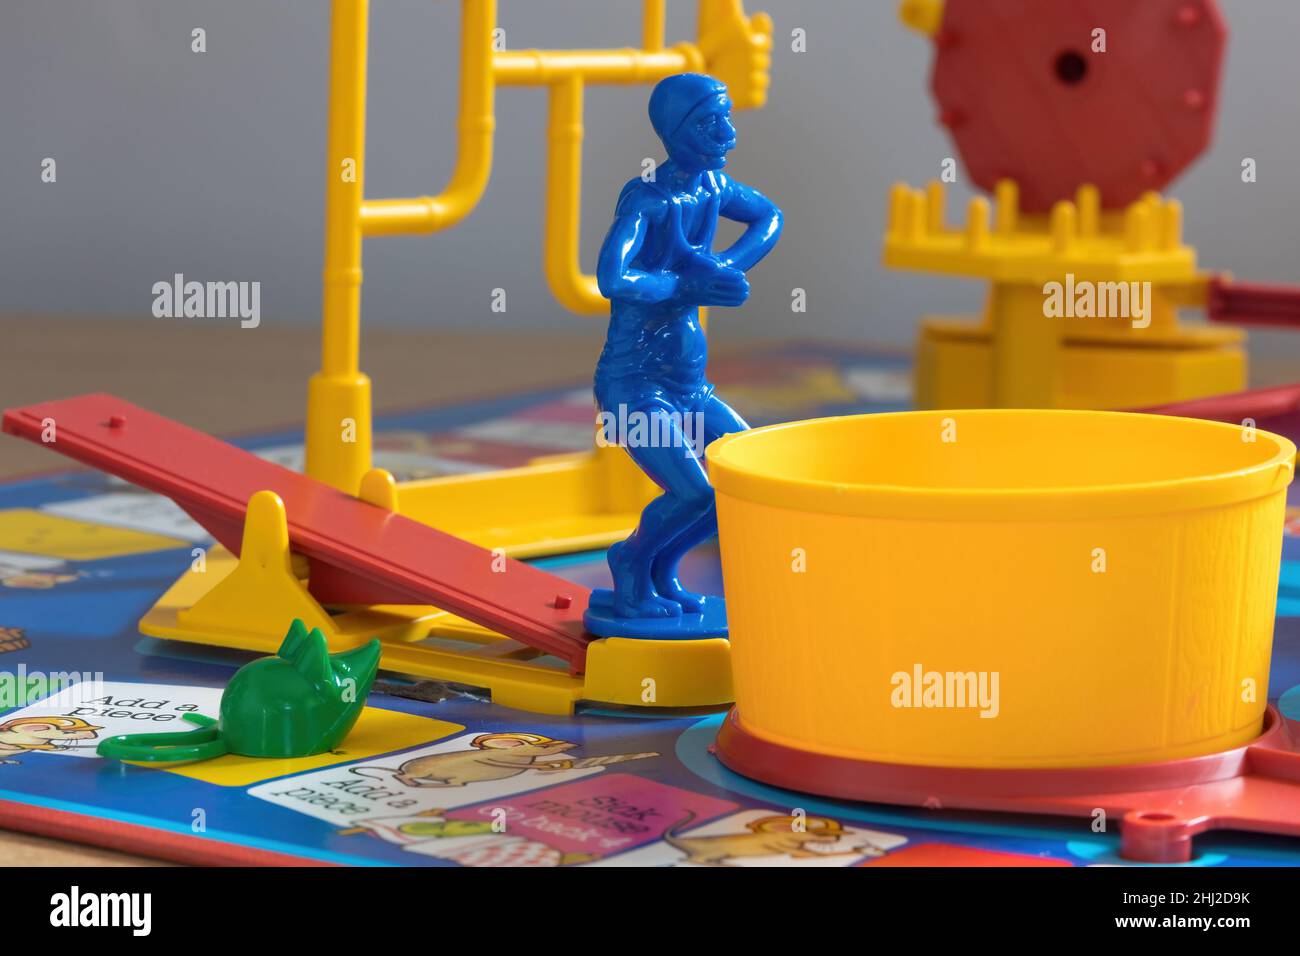 A close up shot of the blue diver standing on the See-Saw and a green mouse on the board. The diver is waiting to dive into the yellow tub. Stock Photo